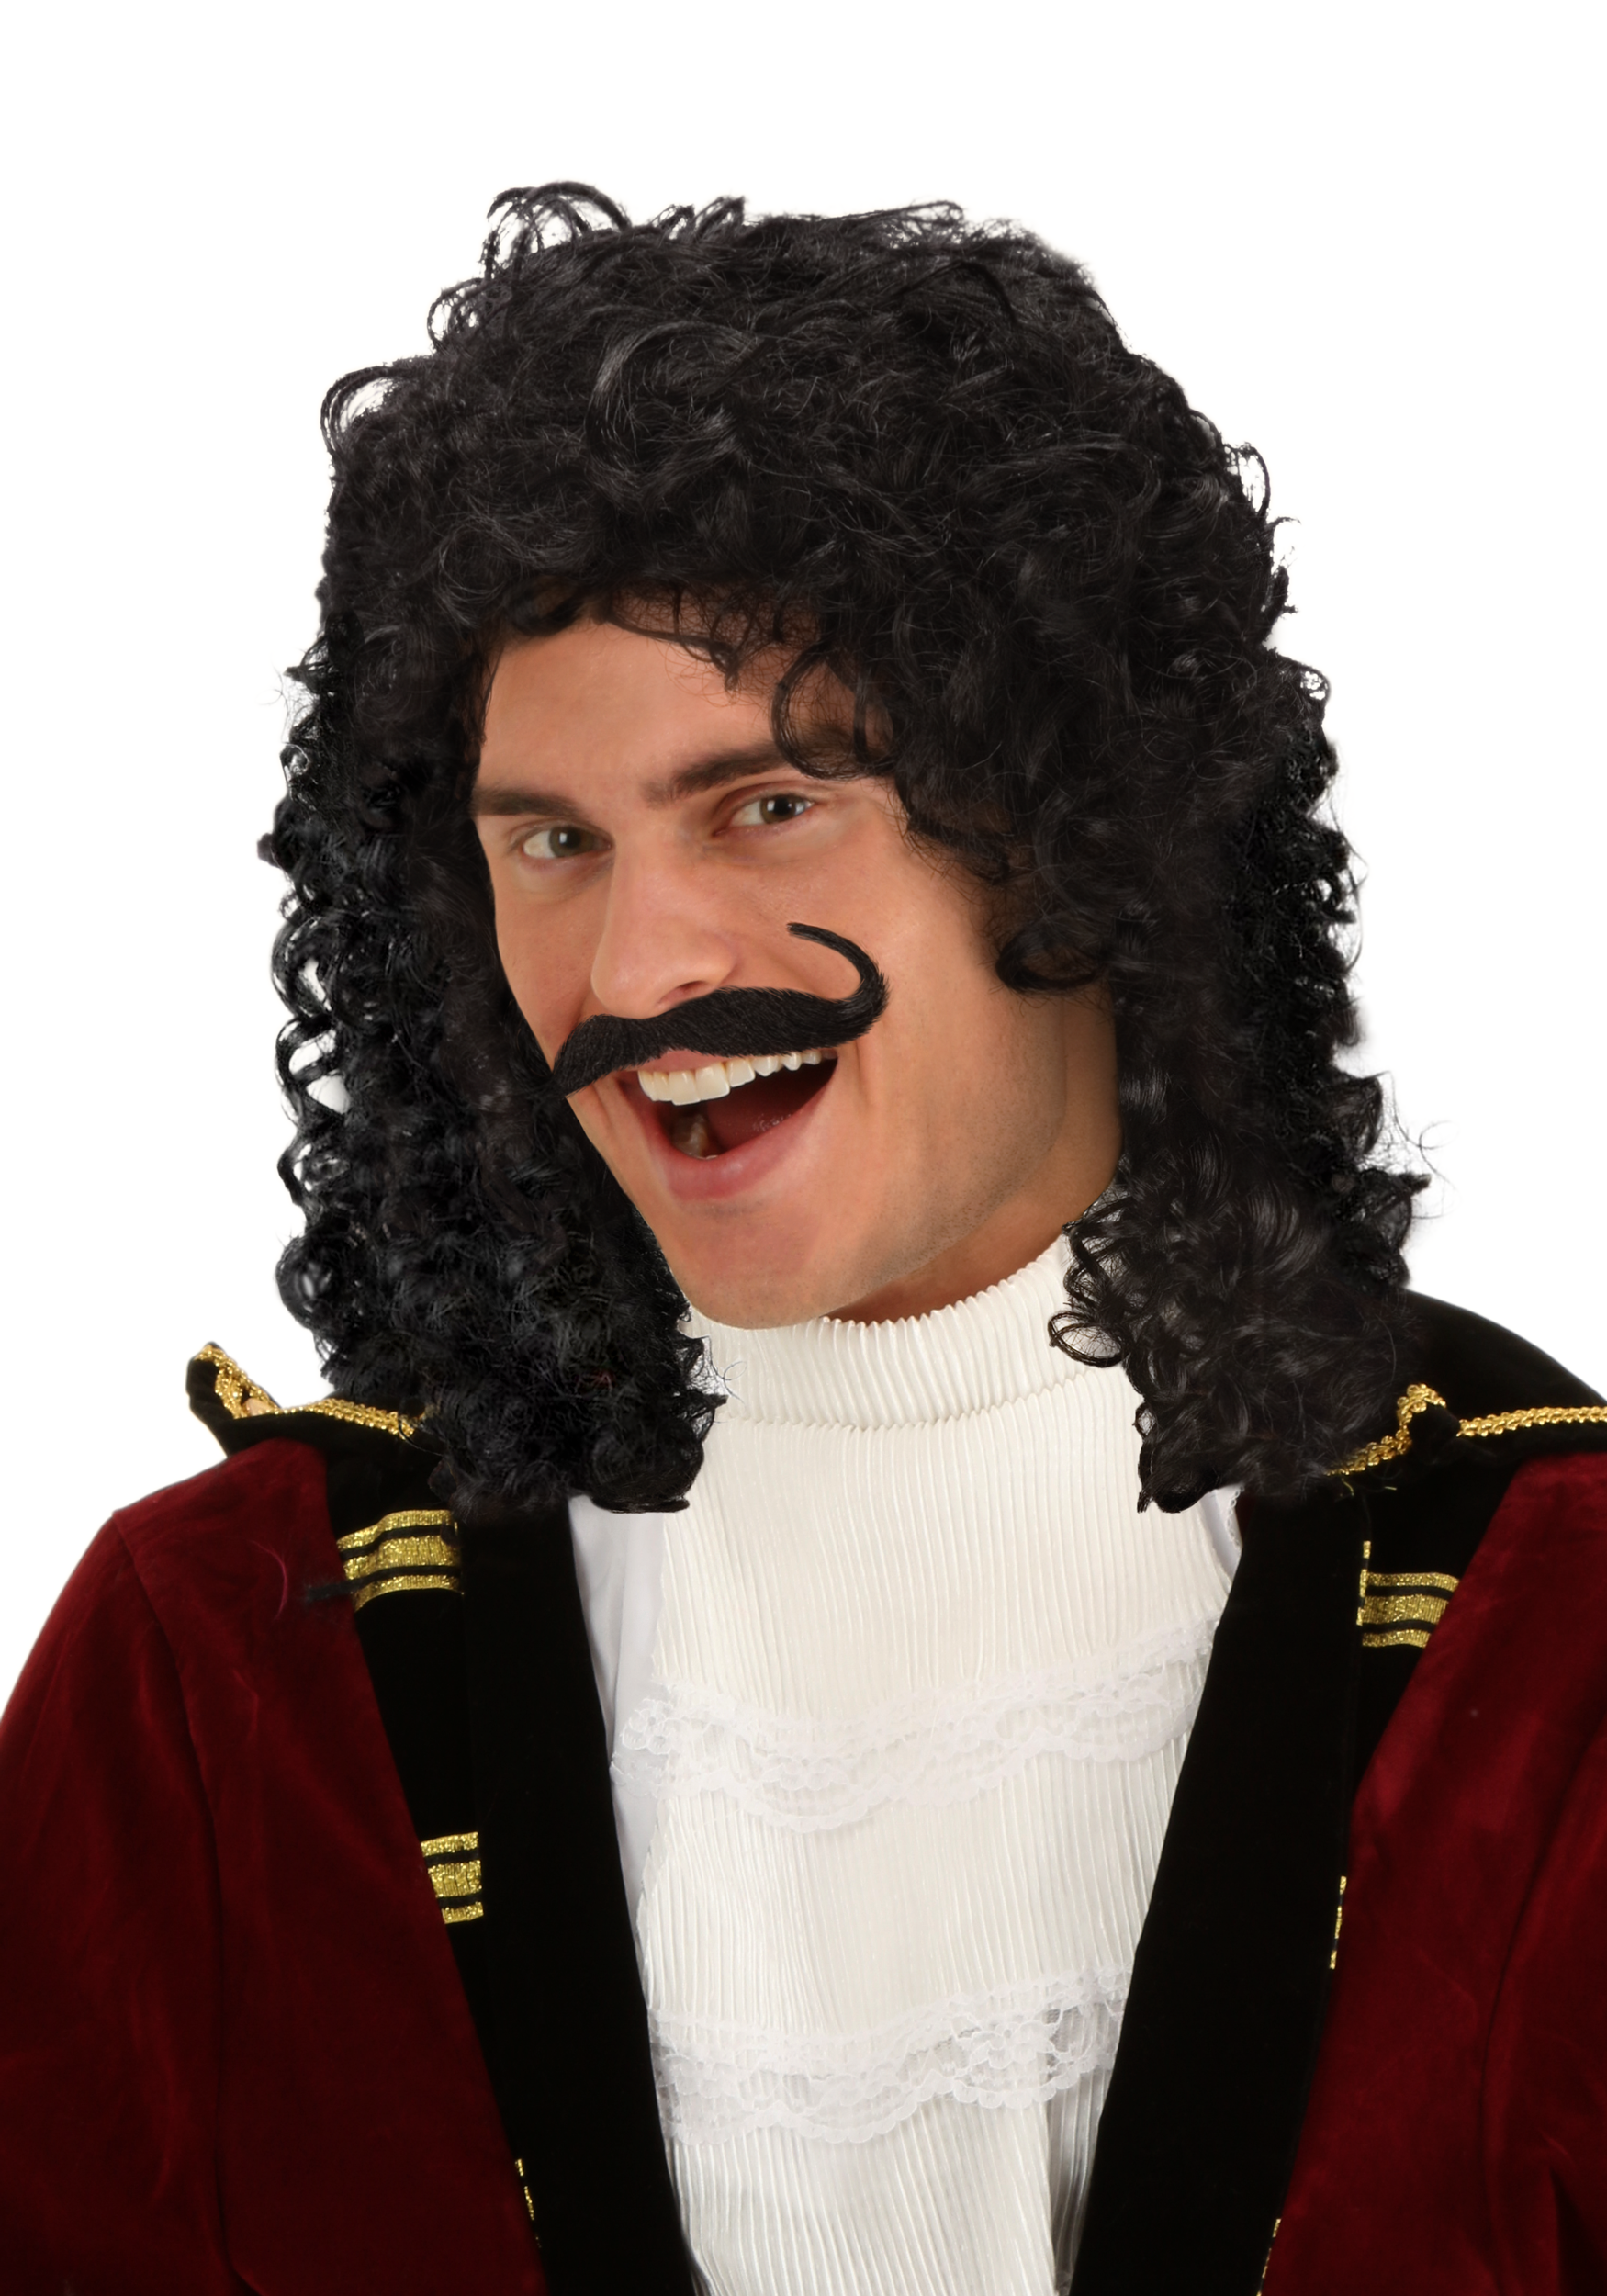 https://images.fun.com/products/4783/1-1/adult-captain-hook-costume-wig.png